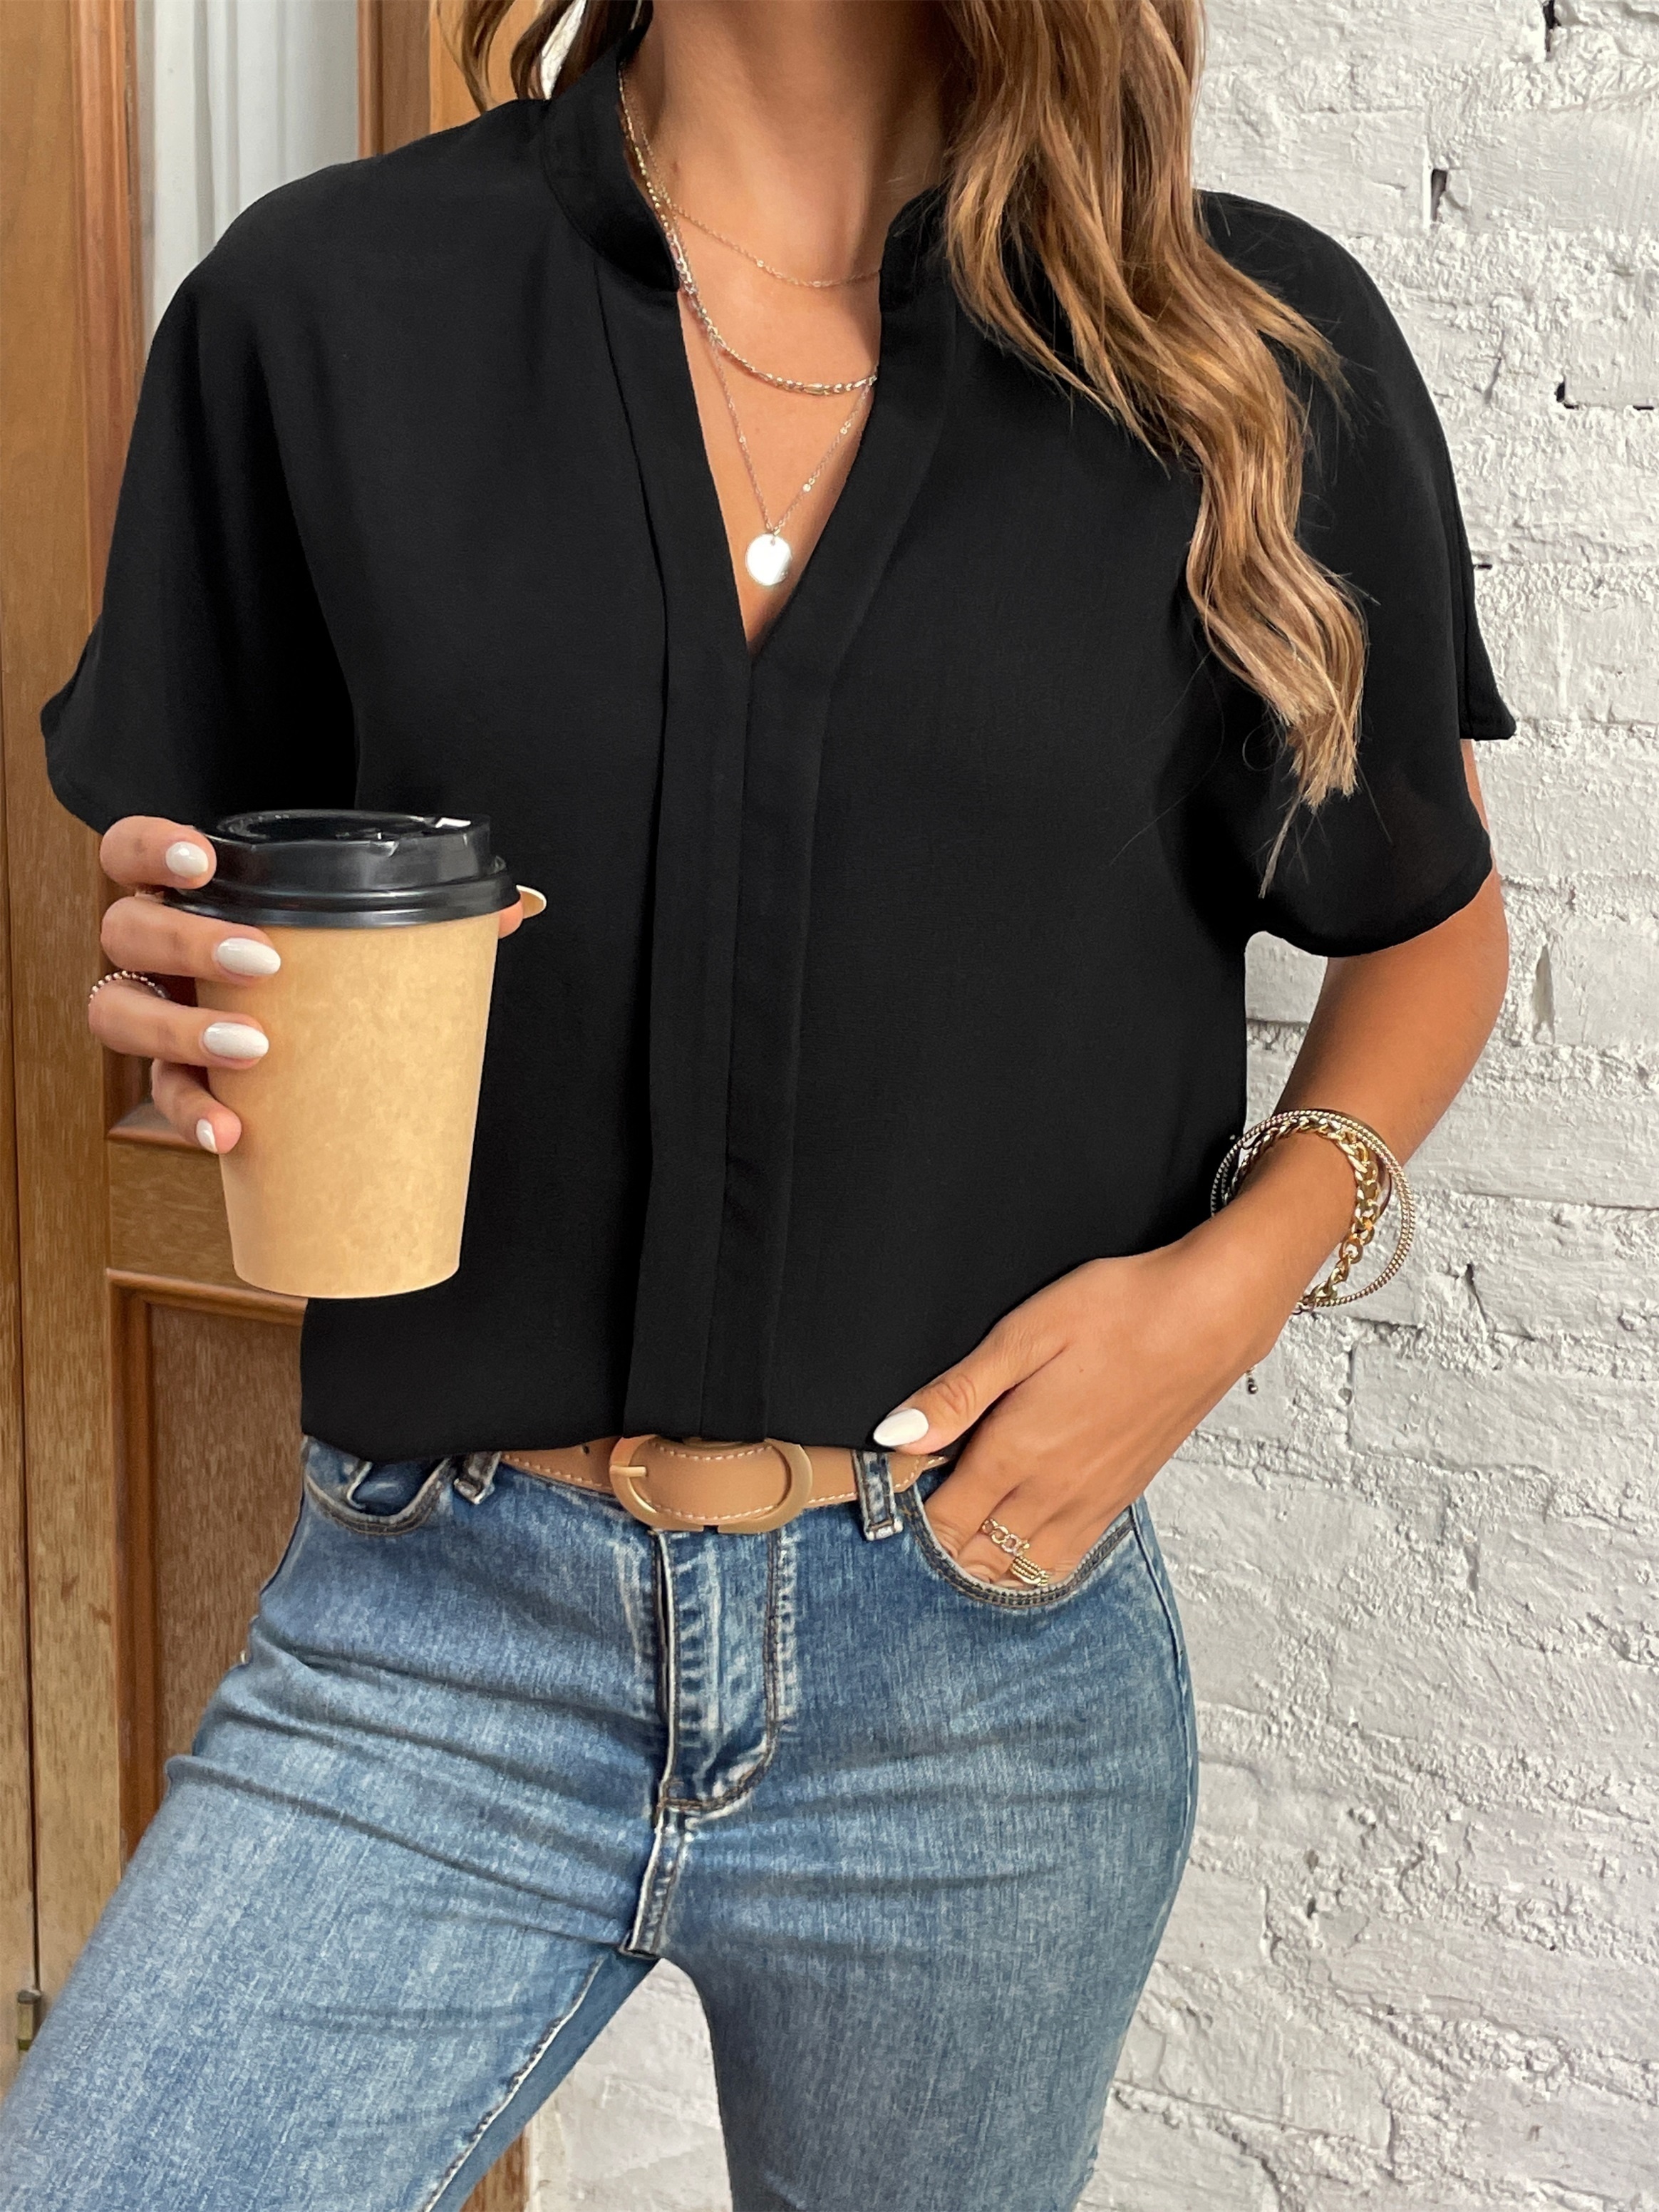 My Comfy Blouse Review